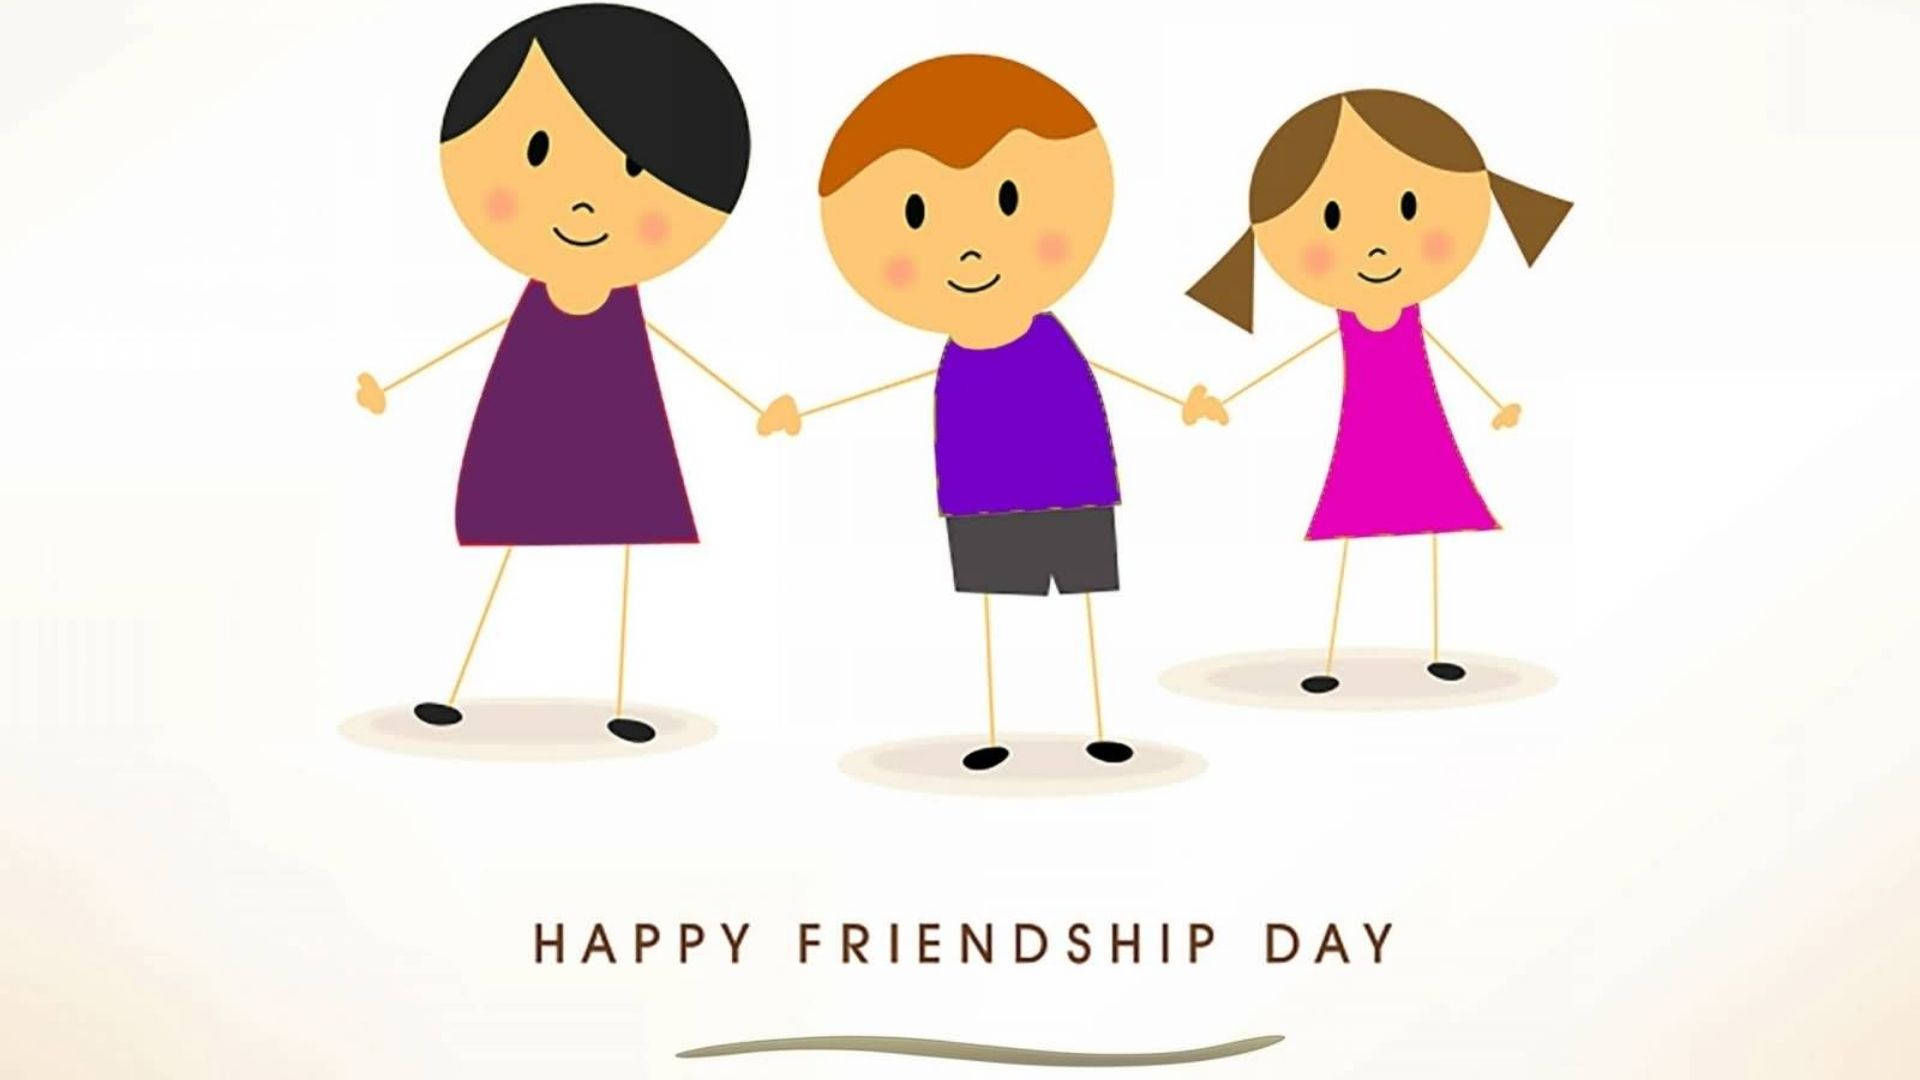 Hands Together On Friendship Day